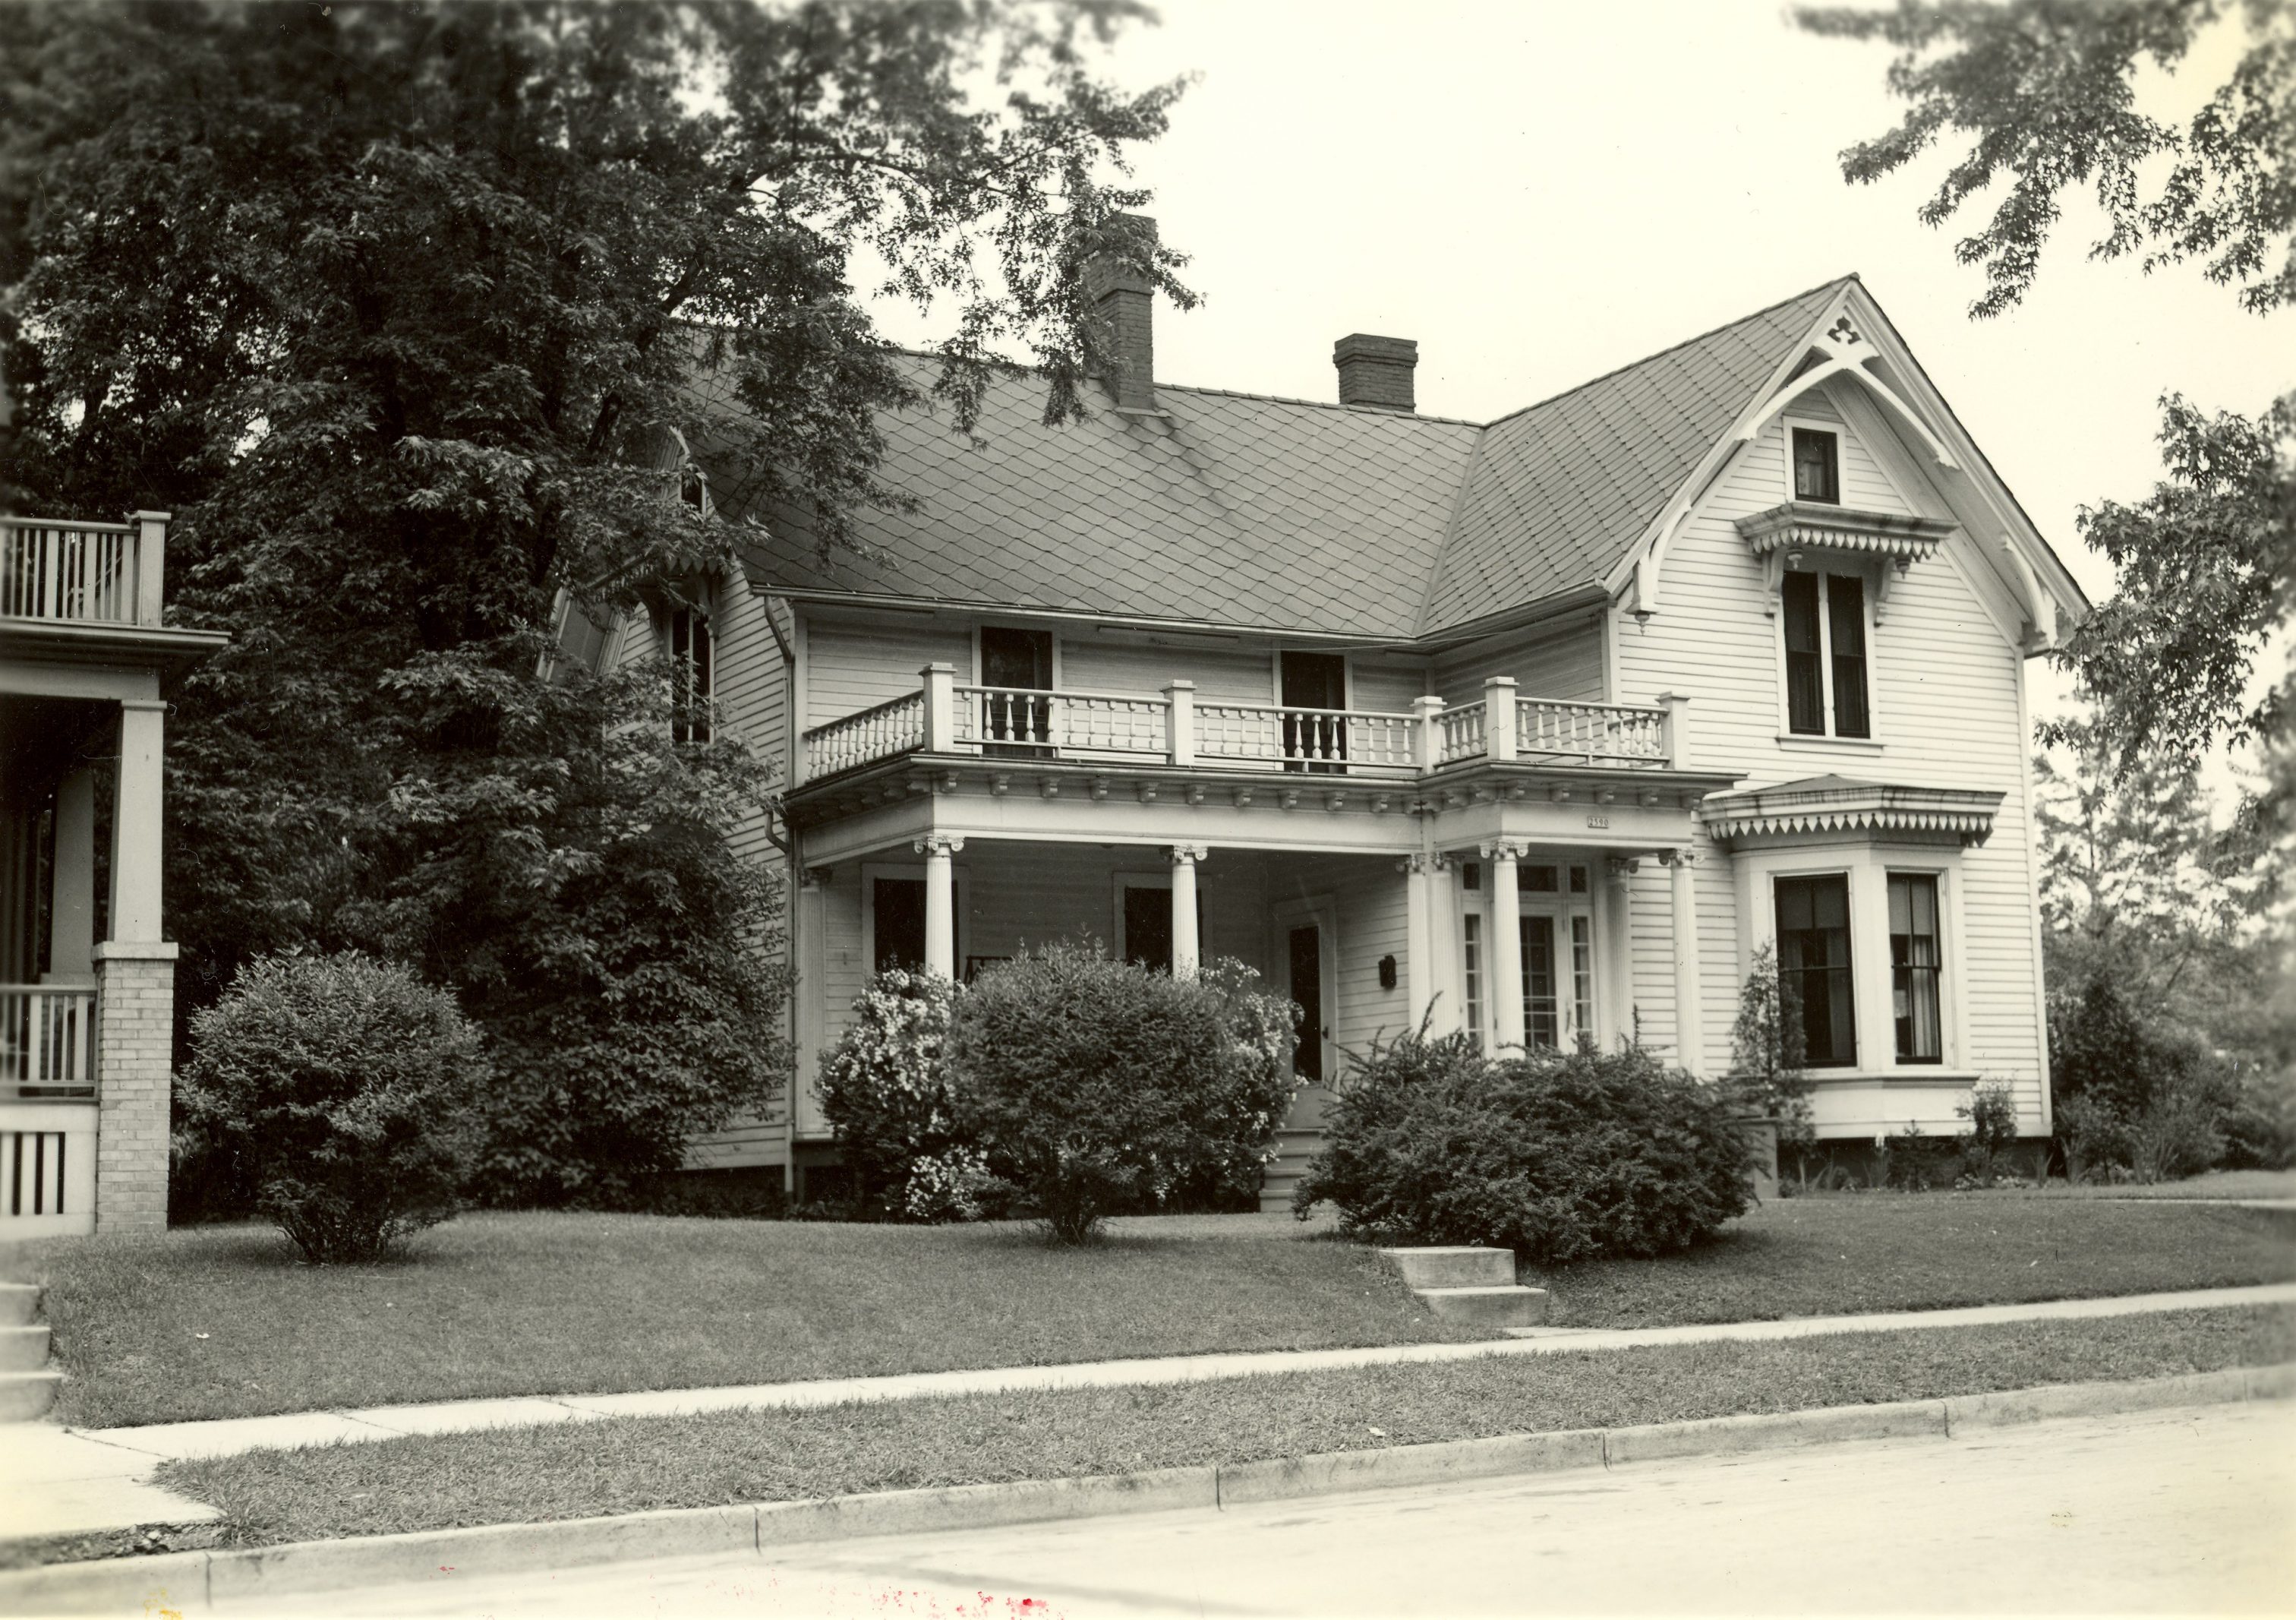 Photograph of the Beulah Brinton House in Bay View. Today, the building is home to the Bay View Historical Society. 